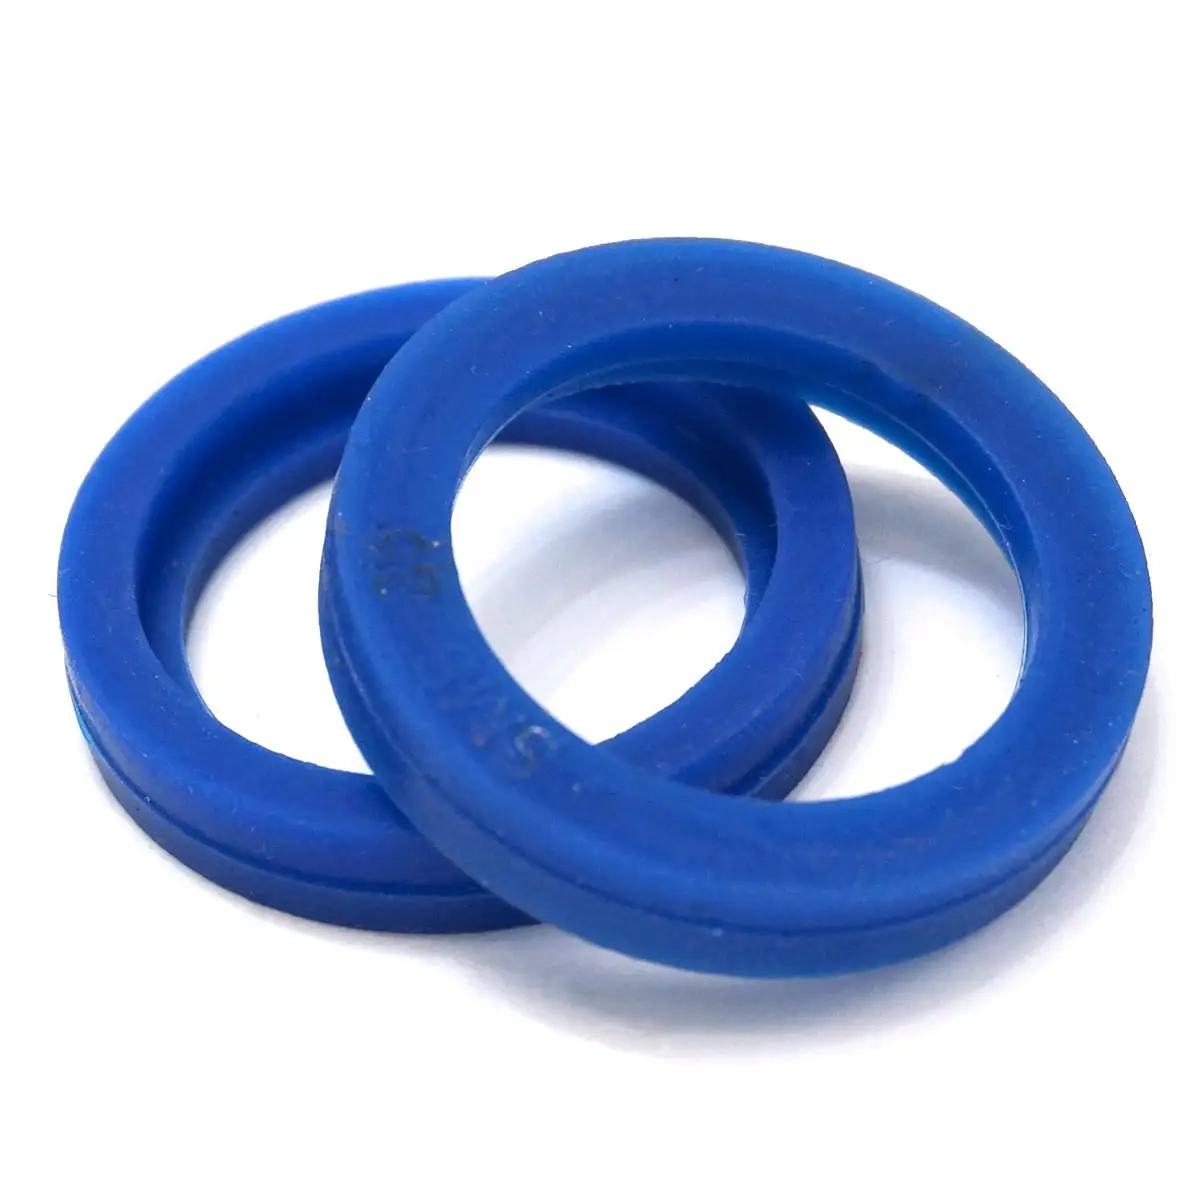 KTS Blue Silicone Flat Gasket Ring Washer Fit 89mm O/D Sanitary SMS Socket Union 